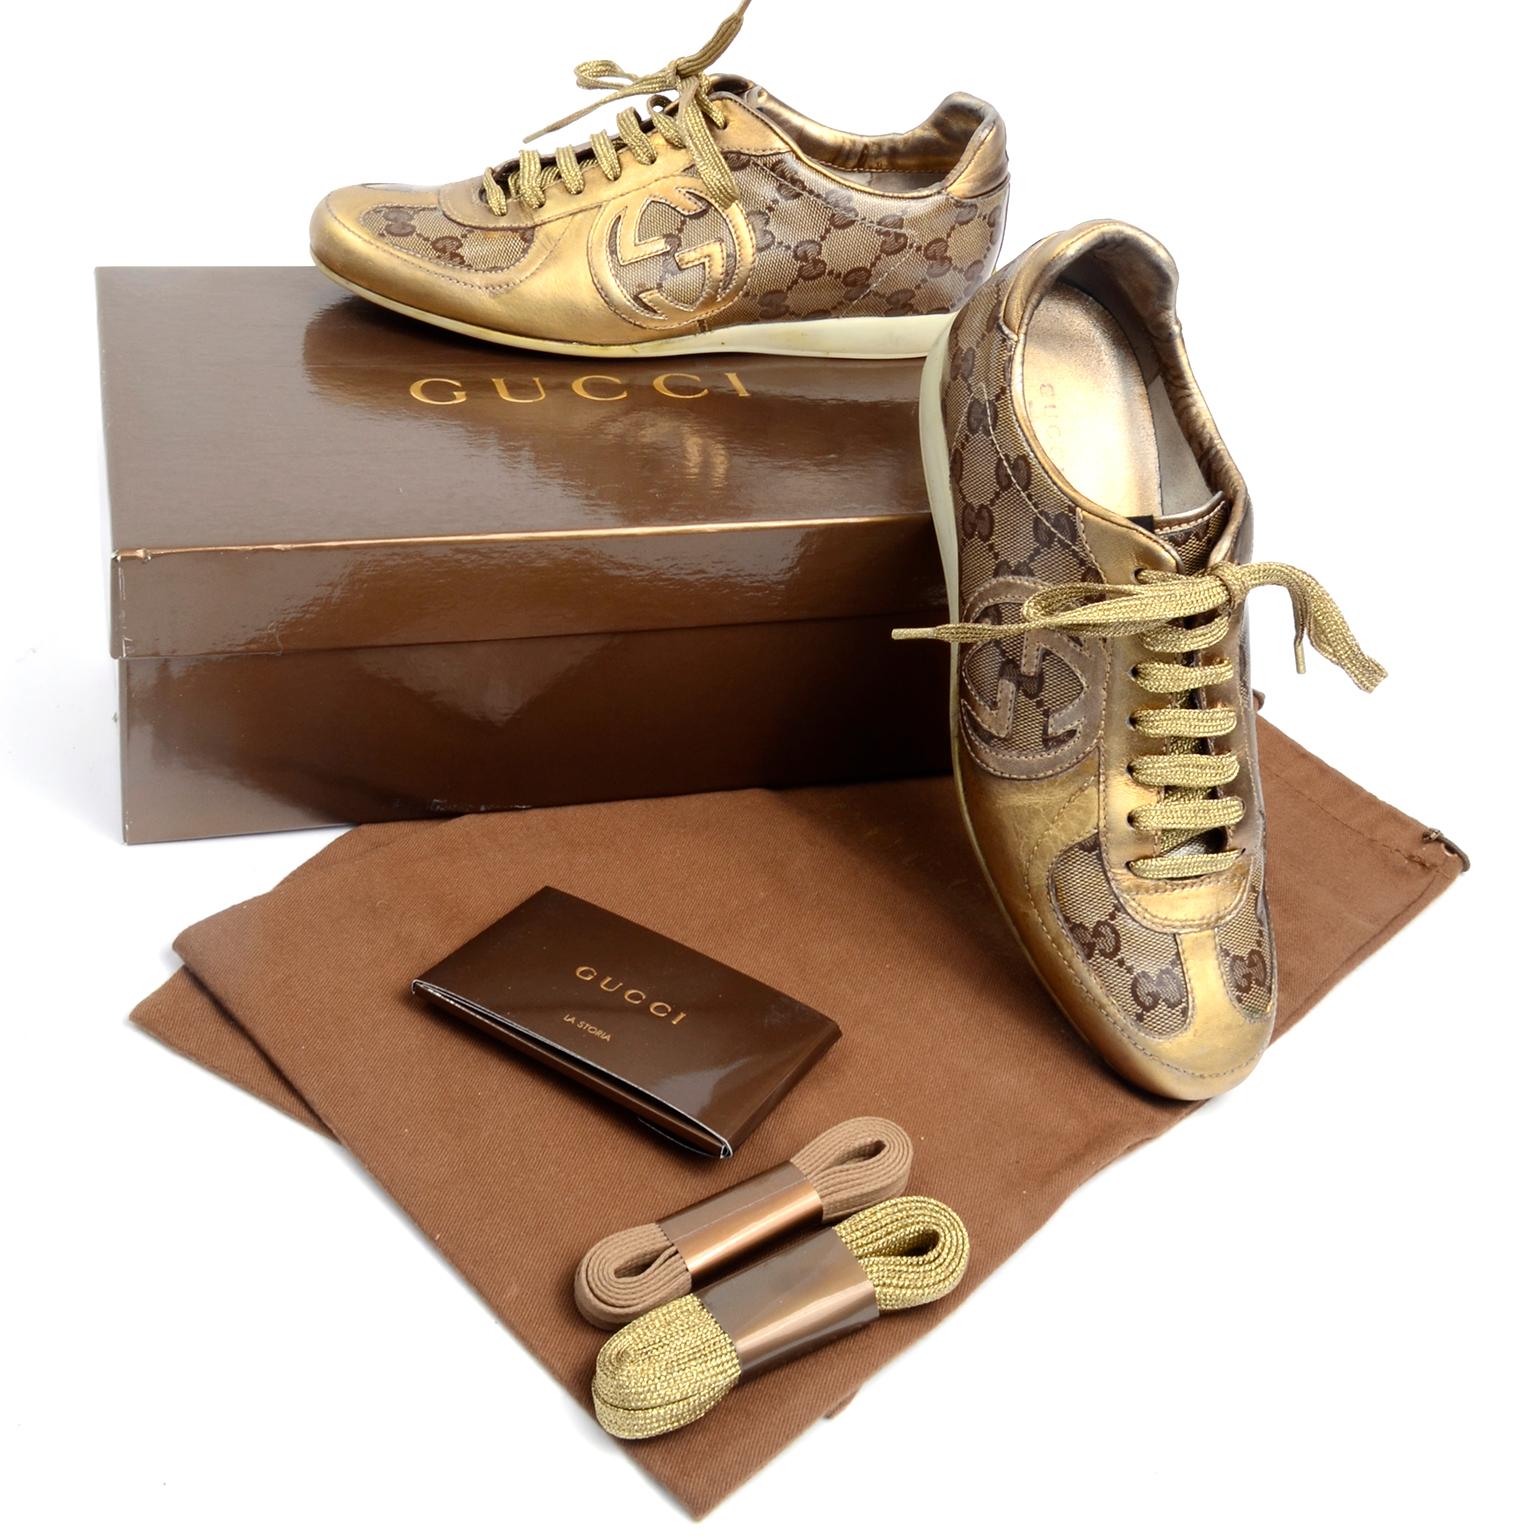 These classic Gucci trainers are in the signature Gucci monogram canvas with gold leather accents and a gold leather GG logo. The sneakers come with their original box, dust bag and 2 pair of extra shoe laces. Labeled a size 36.
Box is marked: